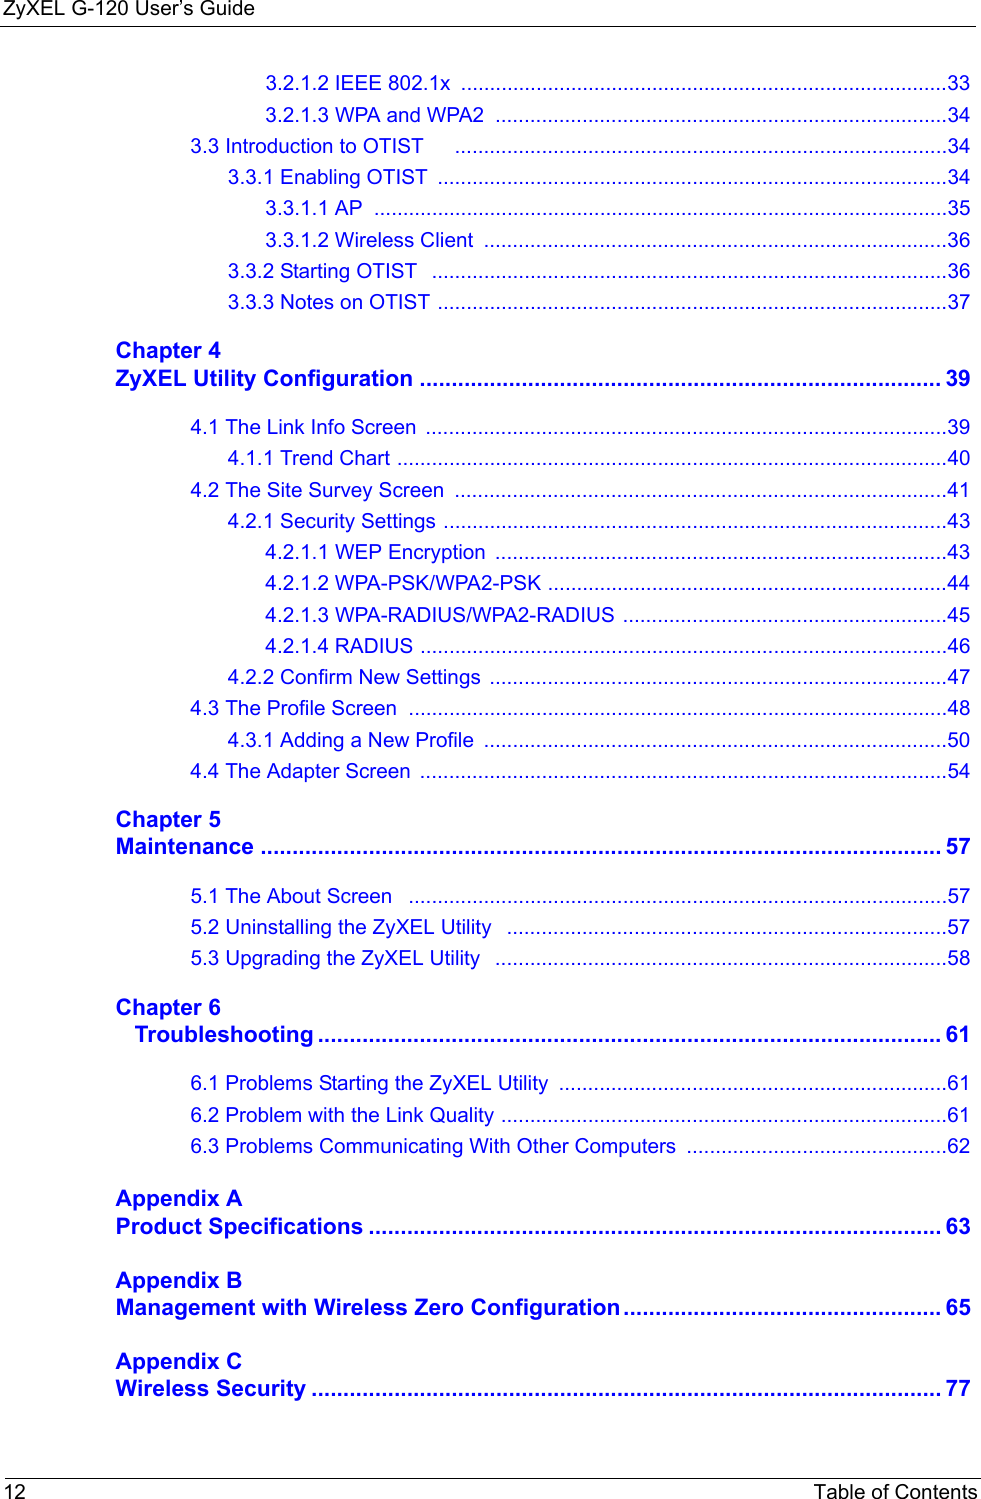 ZyXEL G-120 User’s Guide12 Table of Contents3.2.1.2 IEEE 802.1x  ....................................................................................333.2.1.3 WPA and WPA2  ..............................................................................343.3 Introduction to OTIST     .....................................................................................343.3.1 Enabling OTIST  ........................................................................................343.3.1.1 AP  ...................................................................................................353.3.1.2 Wireless Client  ................................................................................363.3.2 Starting OTIST   .........................................................................................363.3.3 Notes on OTIST ........................................................................................37Chapter 4ZyXEL Utility Configuration .................................................................................. 394.1 The Link Info Screen  ..........................................................................................394.1.1 Trend Chart ...............................................................................................404.2 The Site Survey Screen  .....................................................................................414.2.1 Security Settings .......................................................................................434.2.1.1 WEP Encryption  ..............................................................................434.2.1.2 WPA-PSK/WPA2-PSK .....................................................................444.2.1.3 WPA-RADIUS/WPA2-RADIUS ........................................................454.2.1.4 RADIUS ...........................................................................................464.2.2 Confirm New Settings  ...............................................................................474.3 The Profile Screen  .............................................................................................484.3.1 Adding a New Profile  ................................................................................504.4 The Adapter Screen  ...........................................................................................54Chapter 5Maintenance ........................................................................................................... 575.1 The About Screen   .............................................................................................575.2 Uninstalling the ZyXEL Utility   ............................................................................575.3 Upgrading the ZyXEL Utility   ..............................................................................58Chapter 6   Troubleshooting .................................................................................................. 616.1 Problems Starting the ZyXEL Utility  ...................................................................616.2 Problem with the Link Quality .............................................................................616.3 Problems Communicating With Other Computers .............................................62Appendix AProduct Specifications .......................................................................................... 63Appendix BManagement with Wireless Zero Configuration.................................................. 65Appendix CWireless Security ................................................................................................... 77